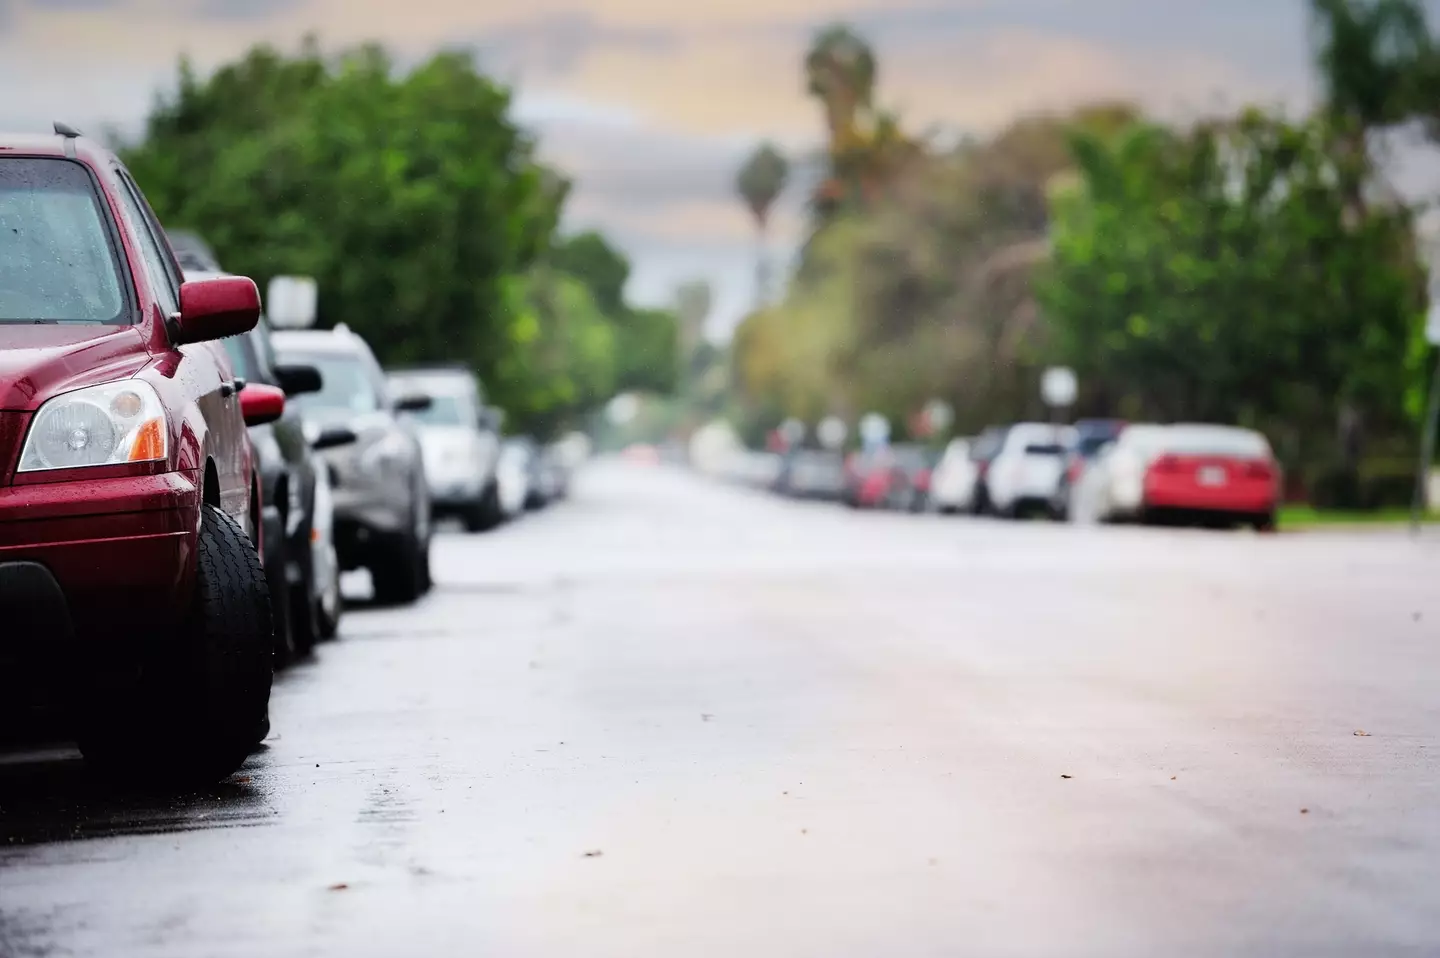 Even the location of where your car is parked can affect the likelihood of it being stolen.